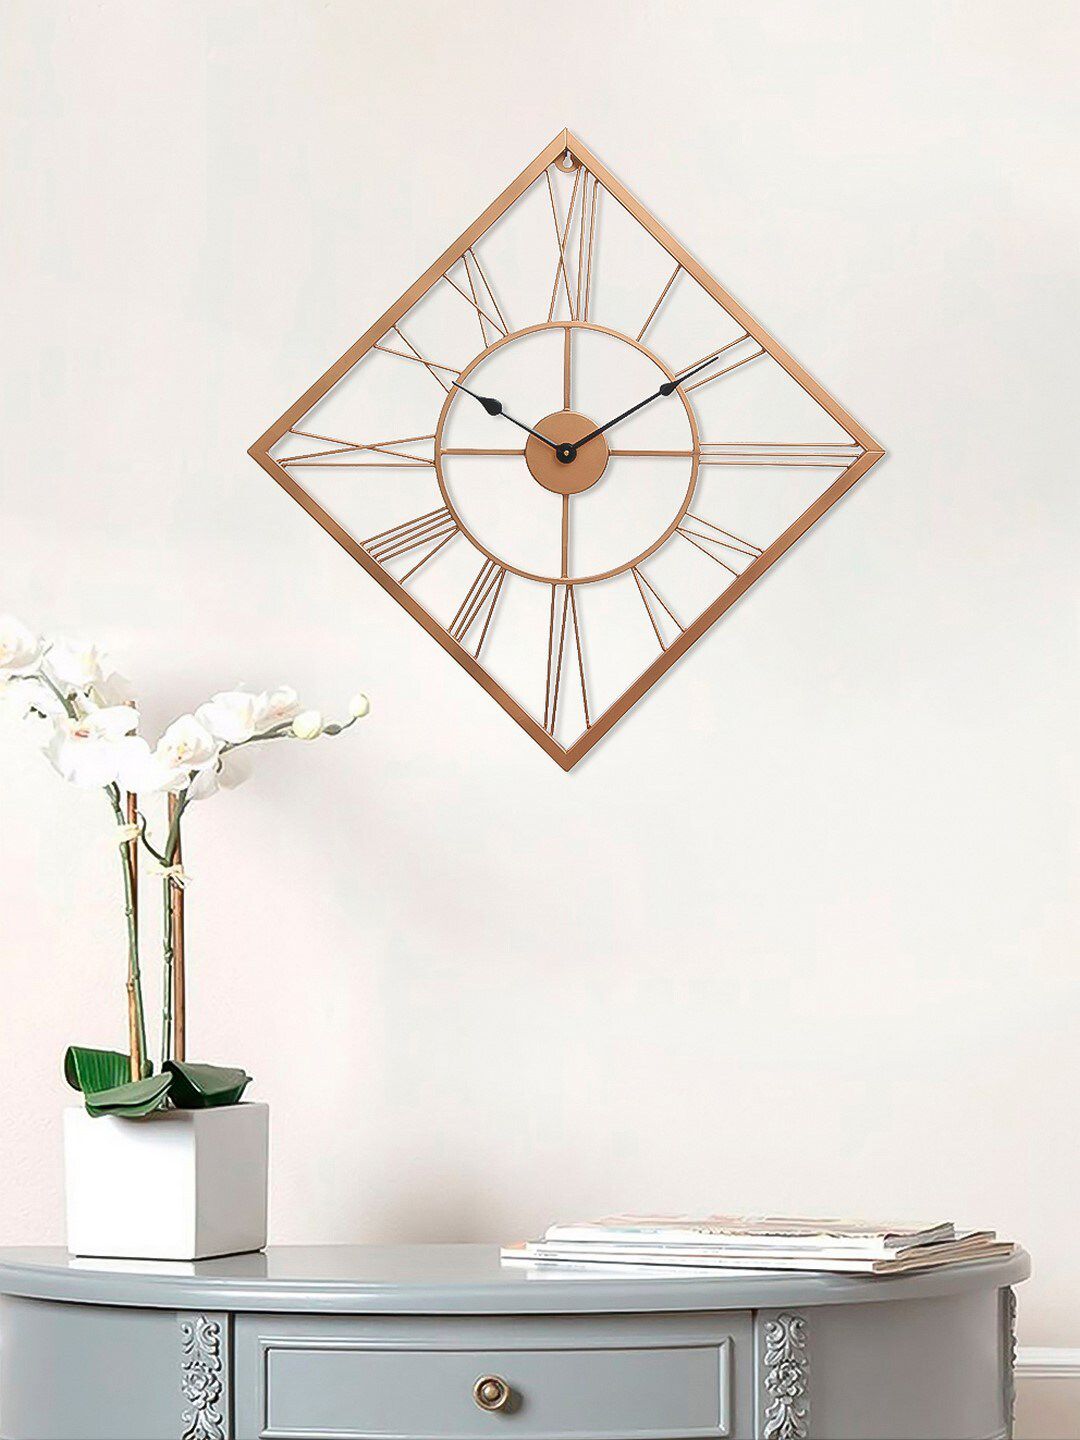 eCraftIndia Copper-Toned Handcrafted Square Solid 64 Cm Analogue Wall Clock Price in India